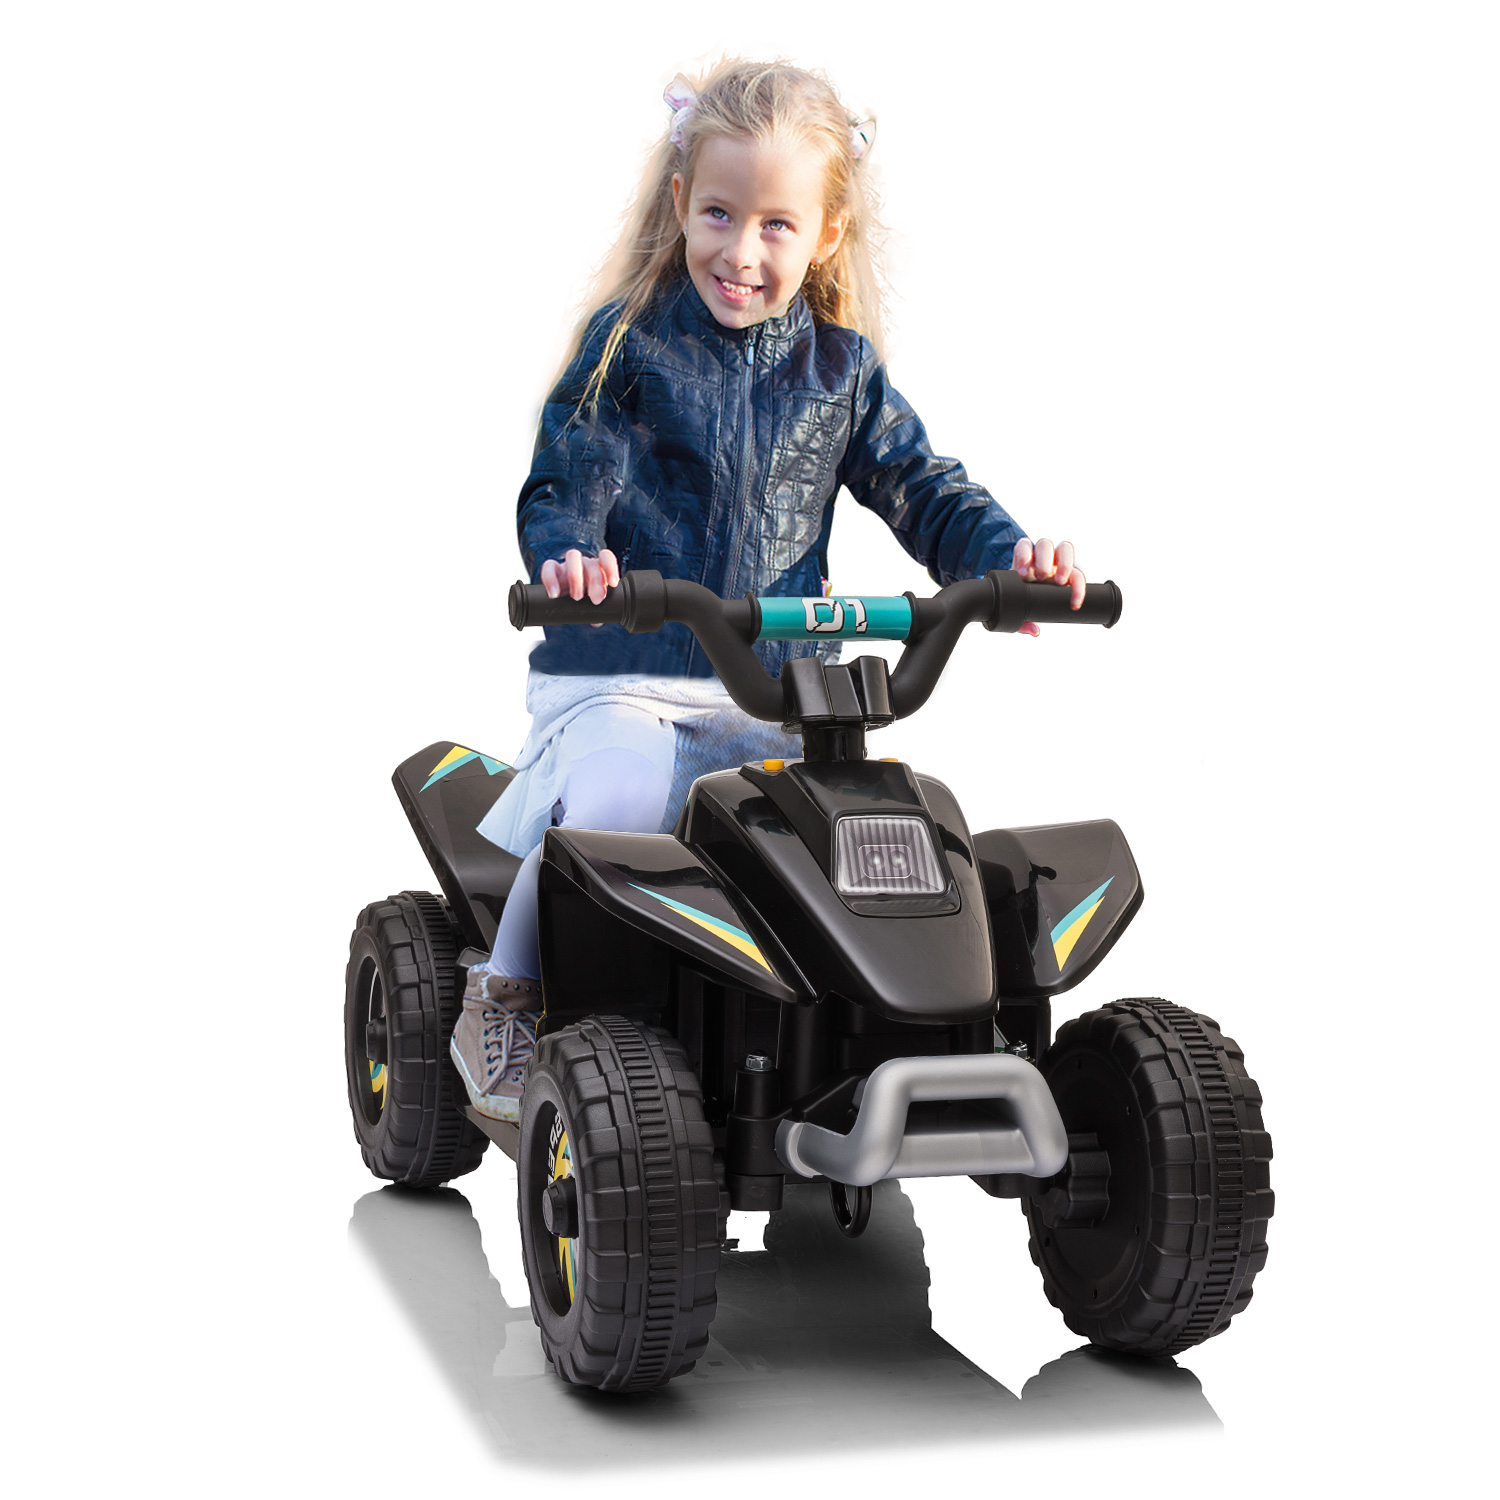 6V Kids Ride On Motorcycle with Headlights, Battery-Powered 4-Wheel Bicycle - Black-Boyel Living